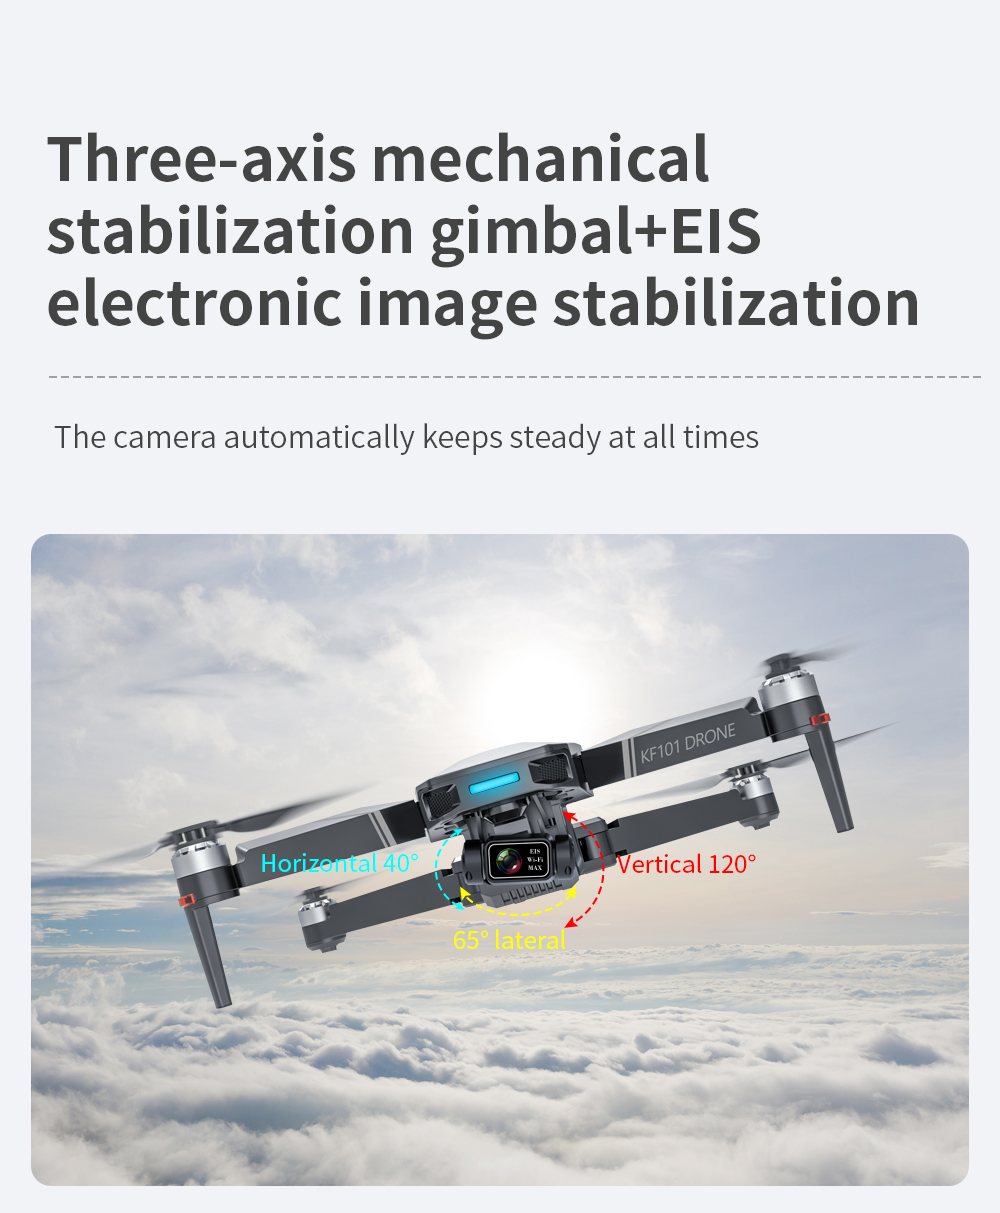 KF101-MAX-GPS-5G-WiFi-3KM-Repeater-FPV-with-4K-HD-ESC-Camera-3-Axis-EIS-Gimbal-Brushless-Foldable-RC-1853126-4